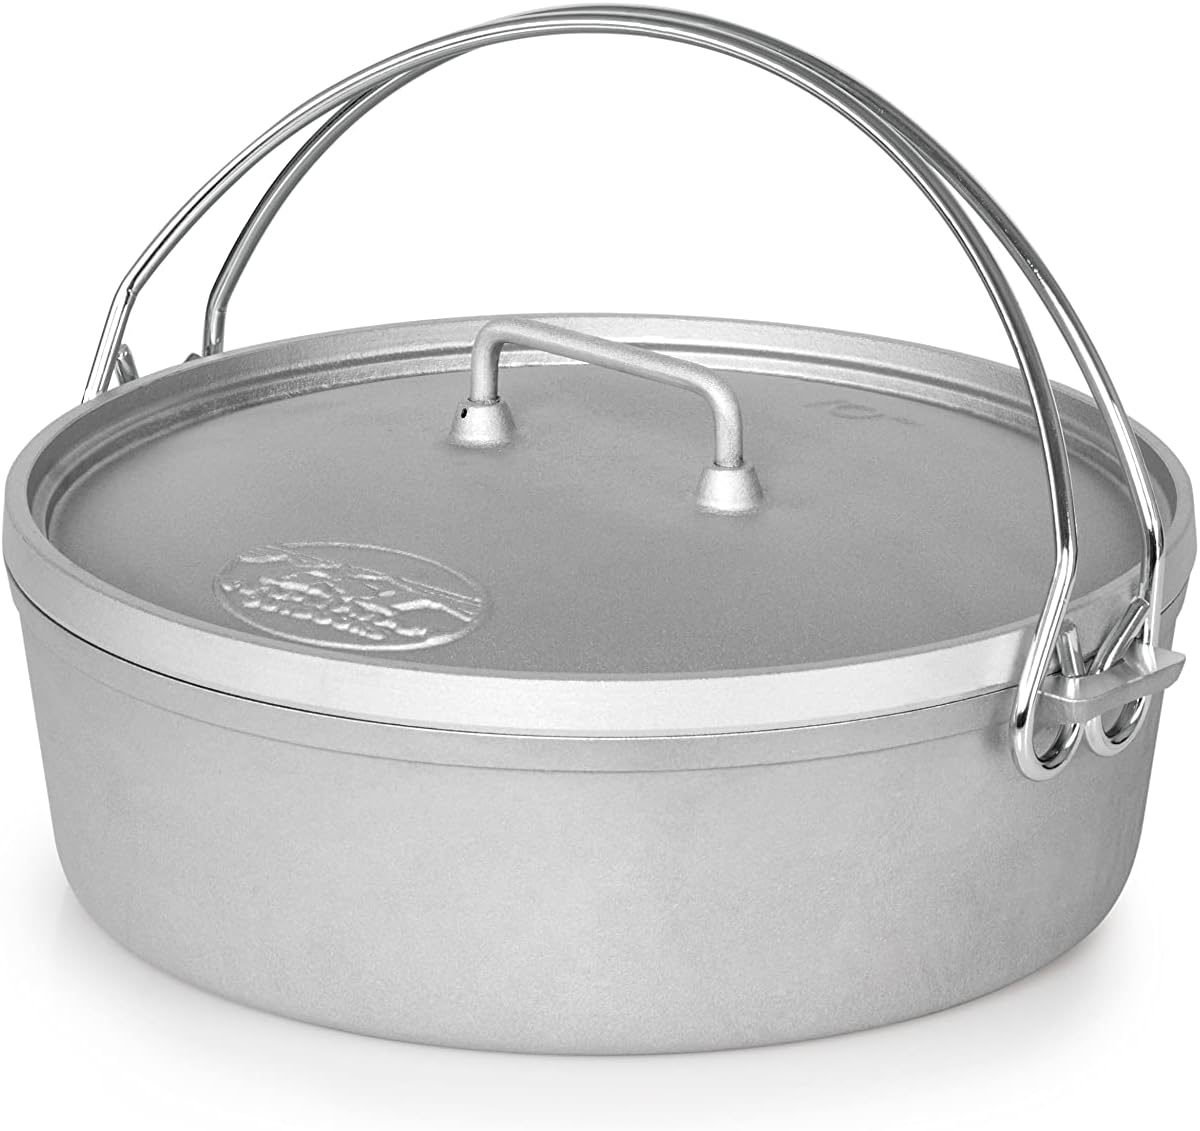 GSI Outdoors Aluminum 12' Dutch Oven | Dutch Oven with Fixed Legs for Camping, Cabin and Home Kitchen